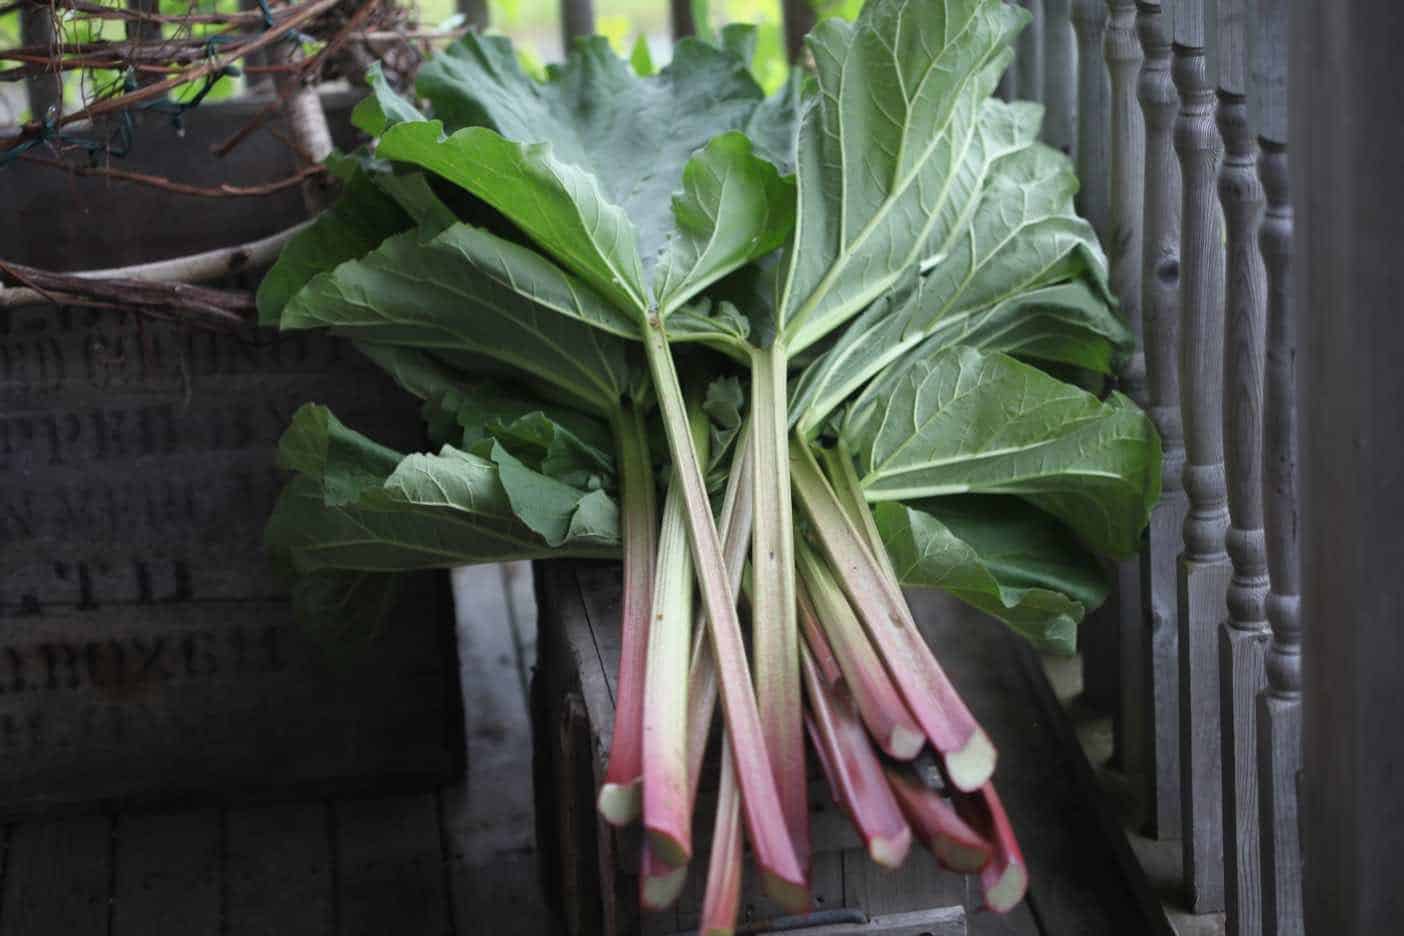 rhubarb stalks on a wooden crate